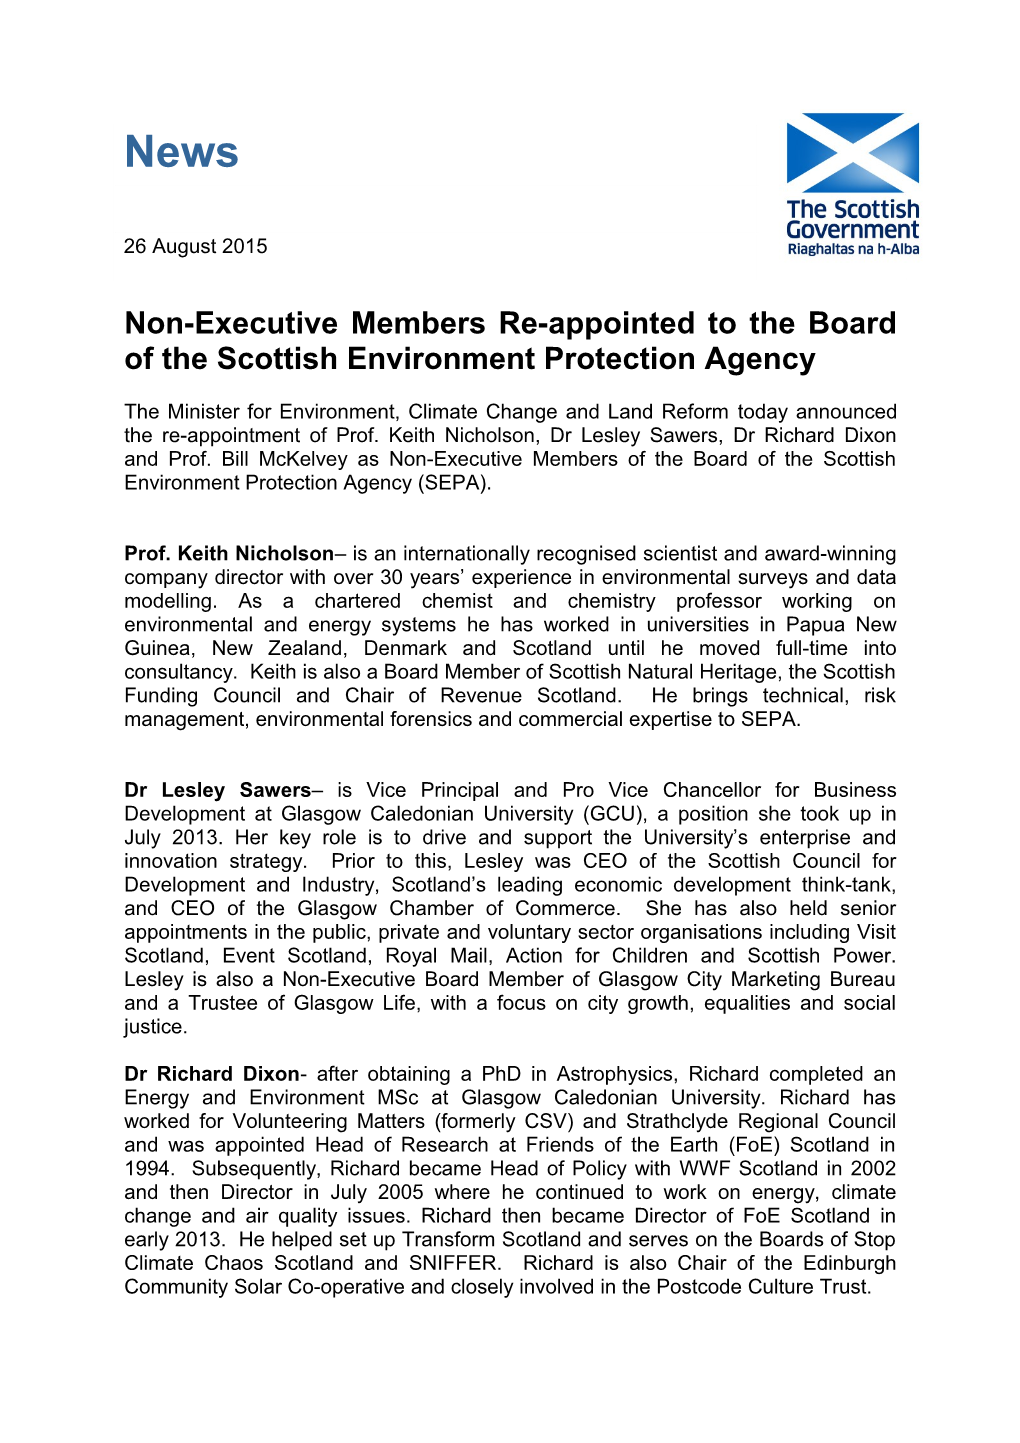 Non-Executive Membersre-Appointed to the Board of the Scottish Environment Protection Agency